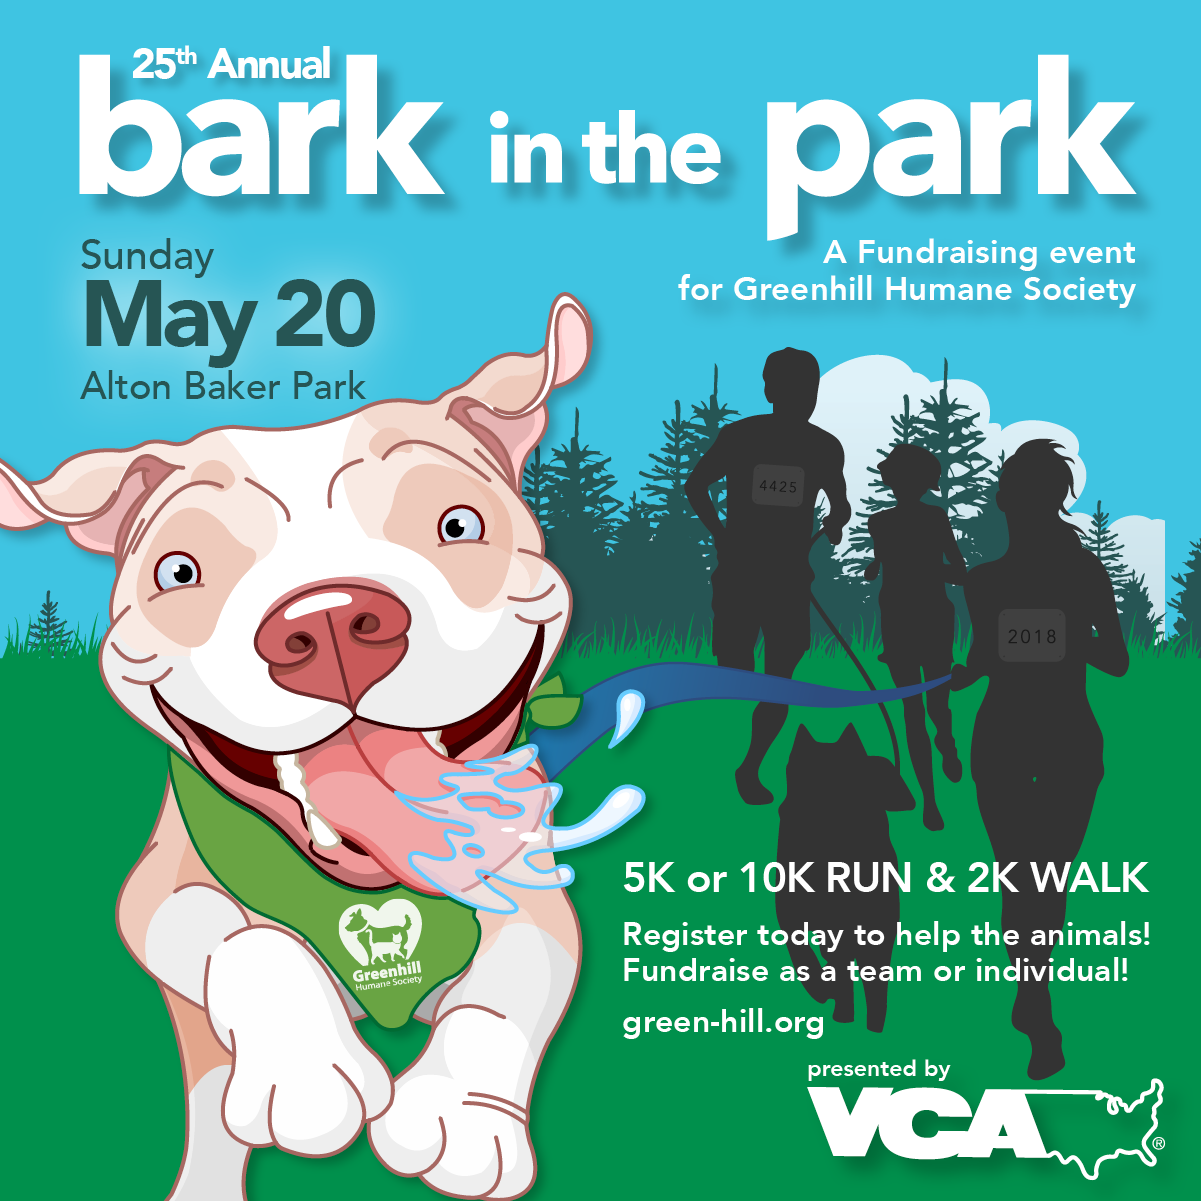 Bark in the Park! Greenhill Humane Society